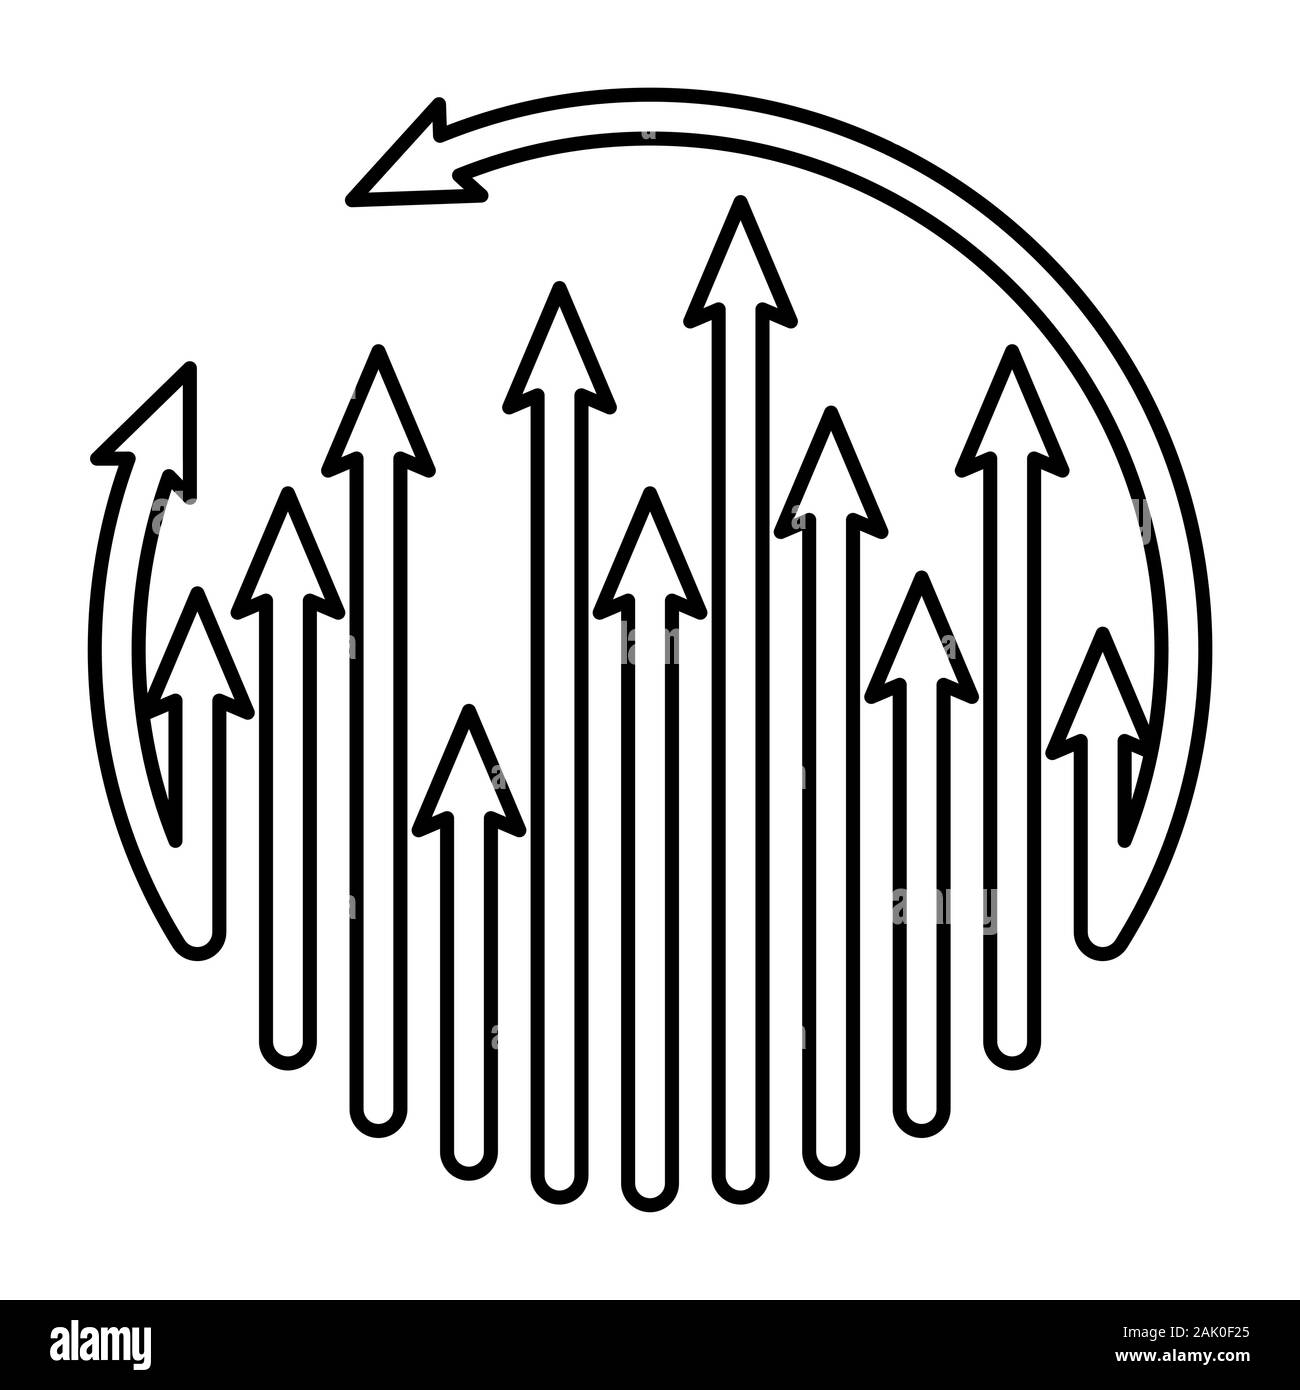 Arrows ilustration cycle growing up Vector template, icon, business, abstract, symbol, design, increase, company, growth, illustration, success concep Stock Vector